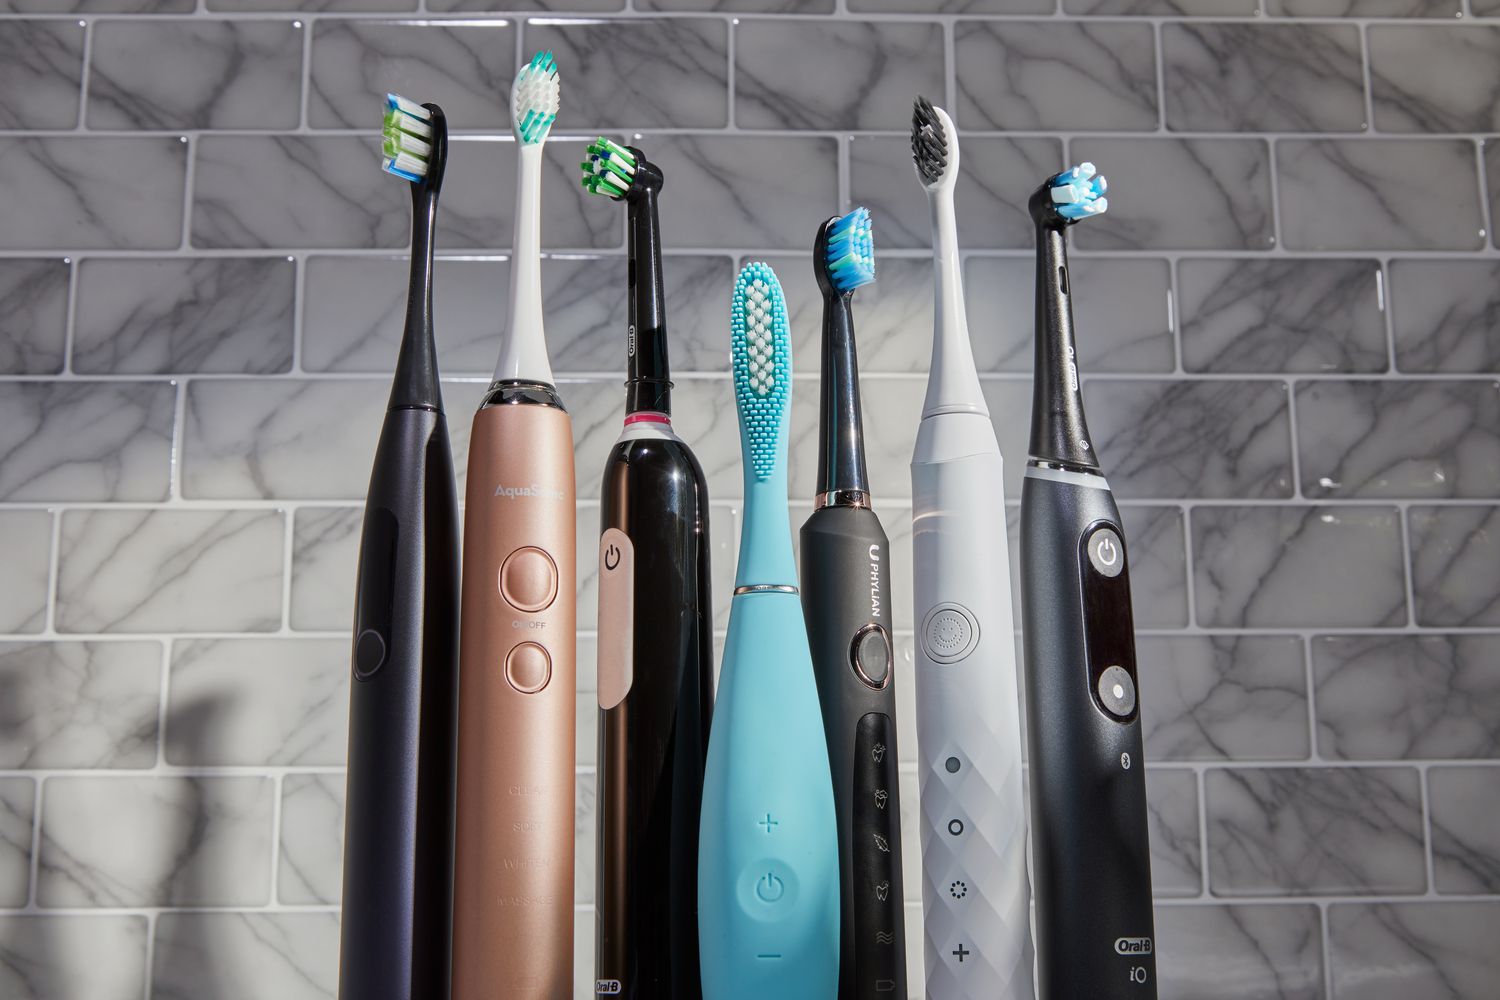 Sonic Toothbrush vs Rotating Toothbrush: Which One Will You Love More?